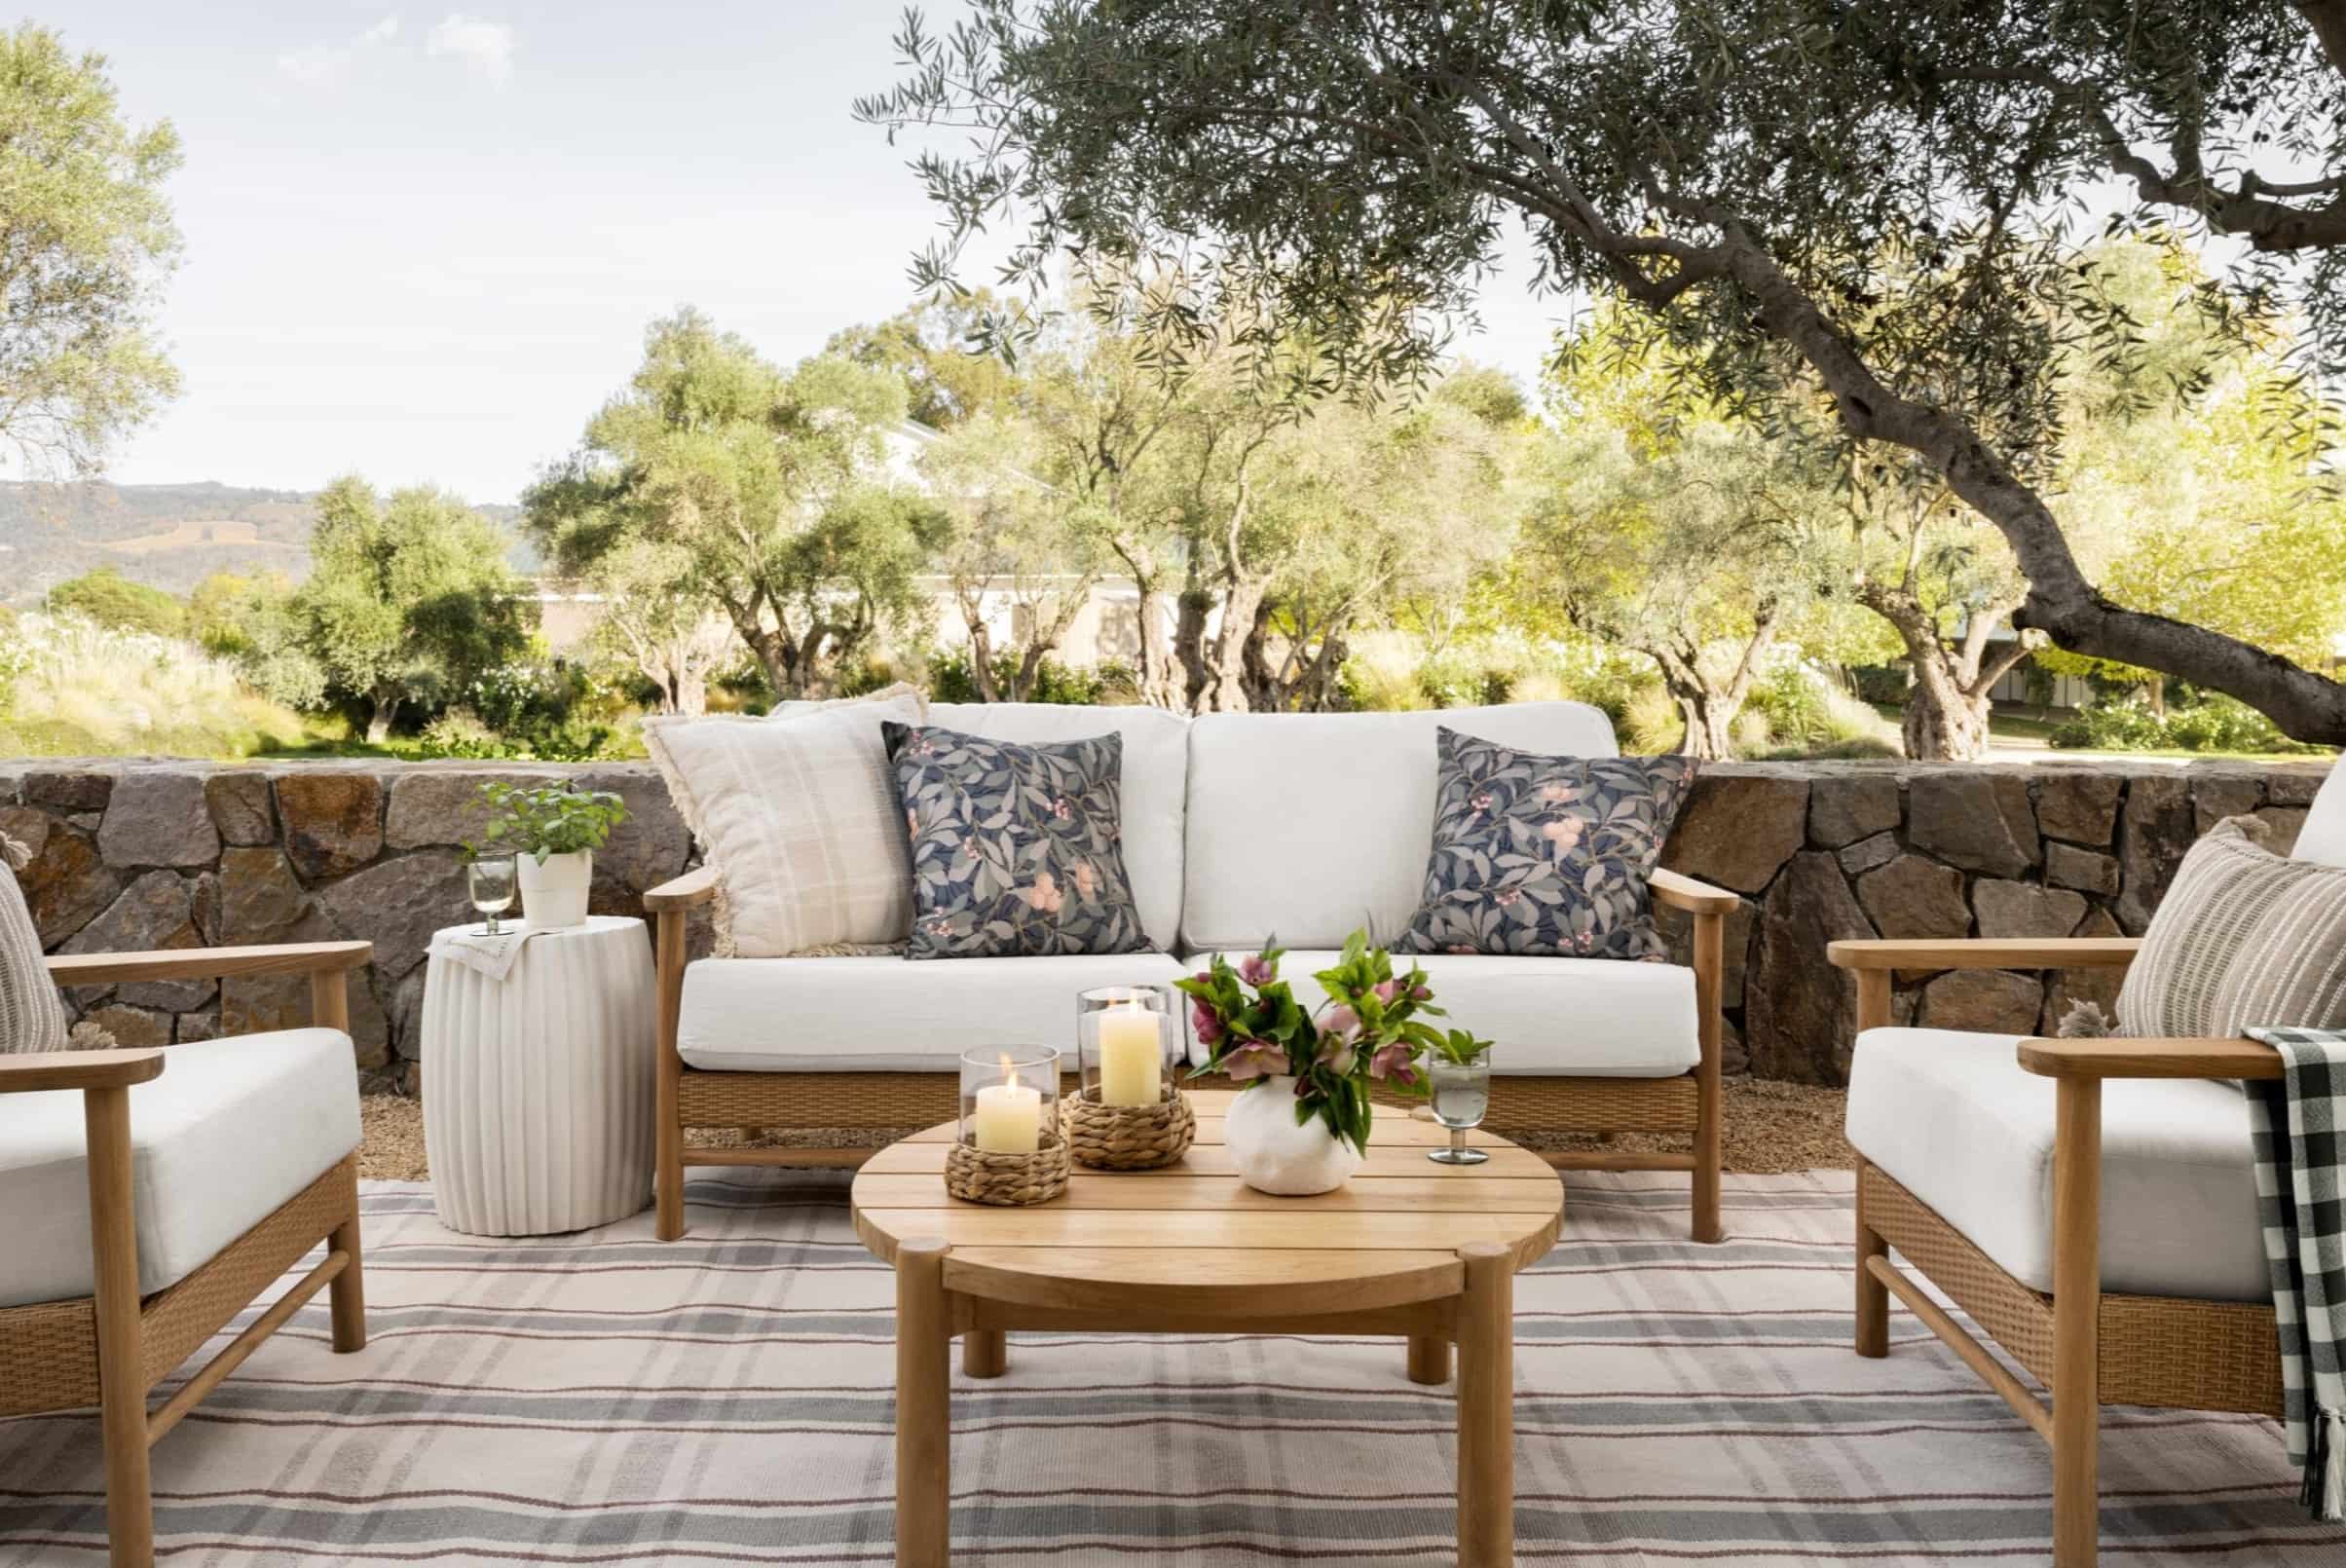 How To Get Outdoor Rug To Lay Flat